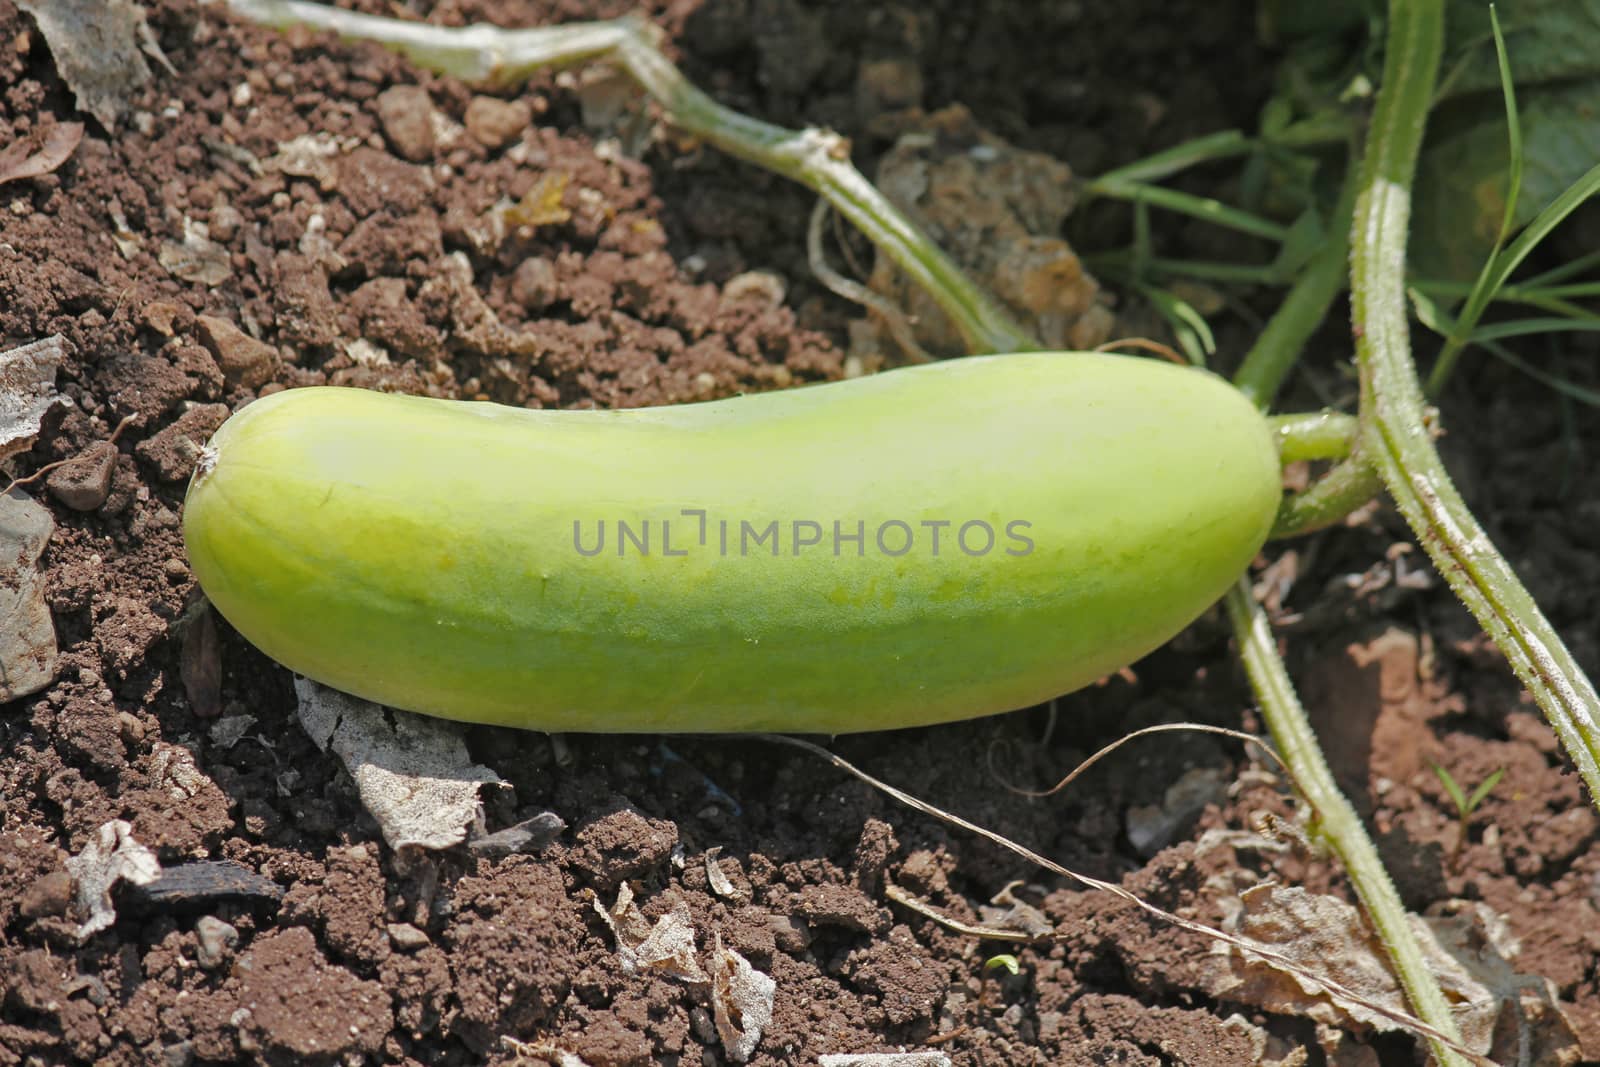 Cucumber, Cucumis sativus  is a widely cultivated plant in the gourd family Cucurbitaceae. It is a creeping vine that bears cylindrical fruits that are used as culinary vegetables